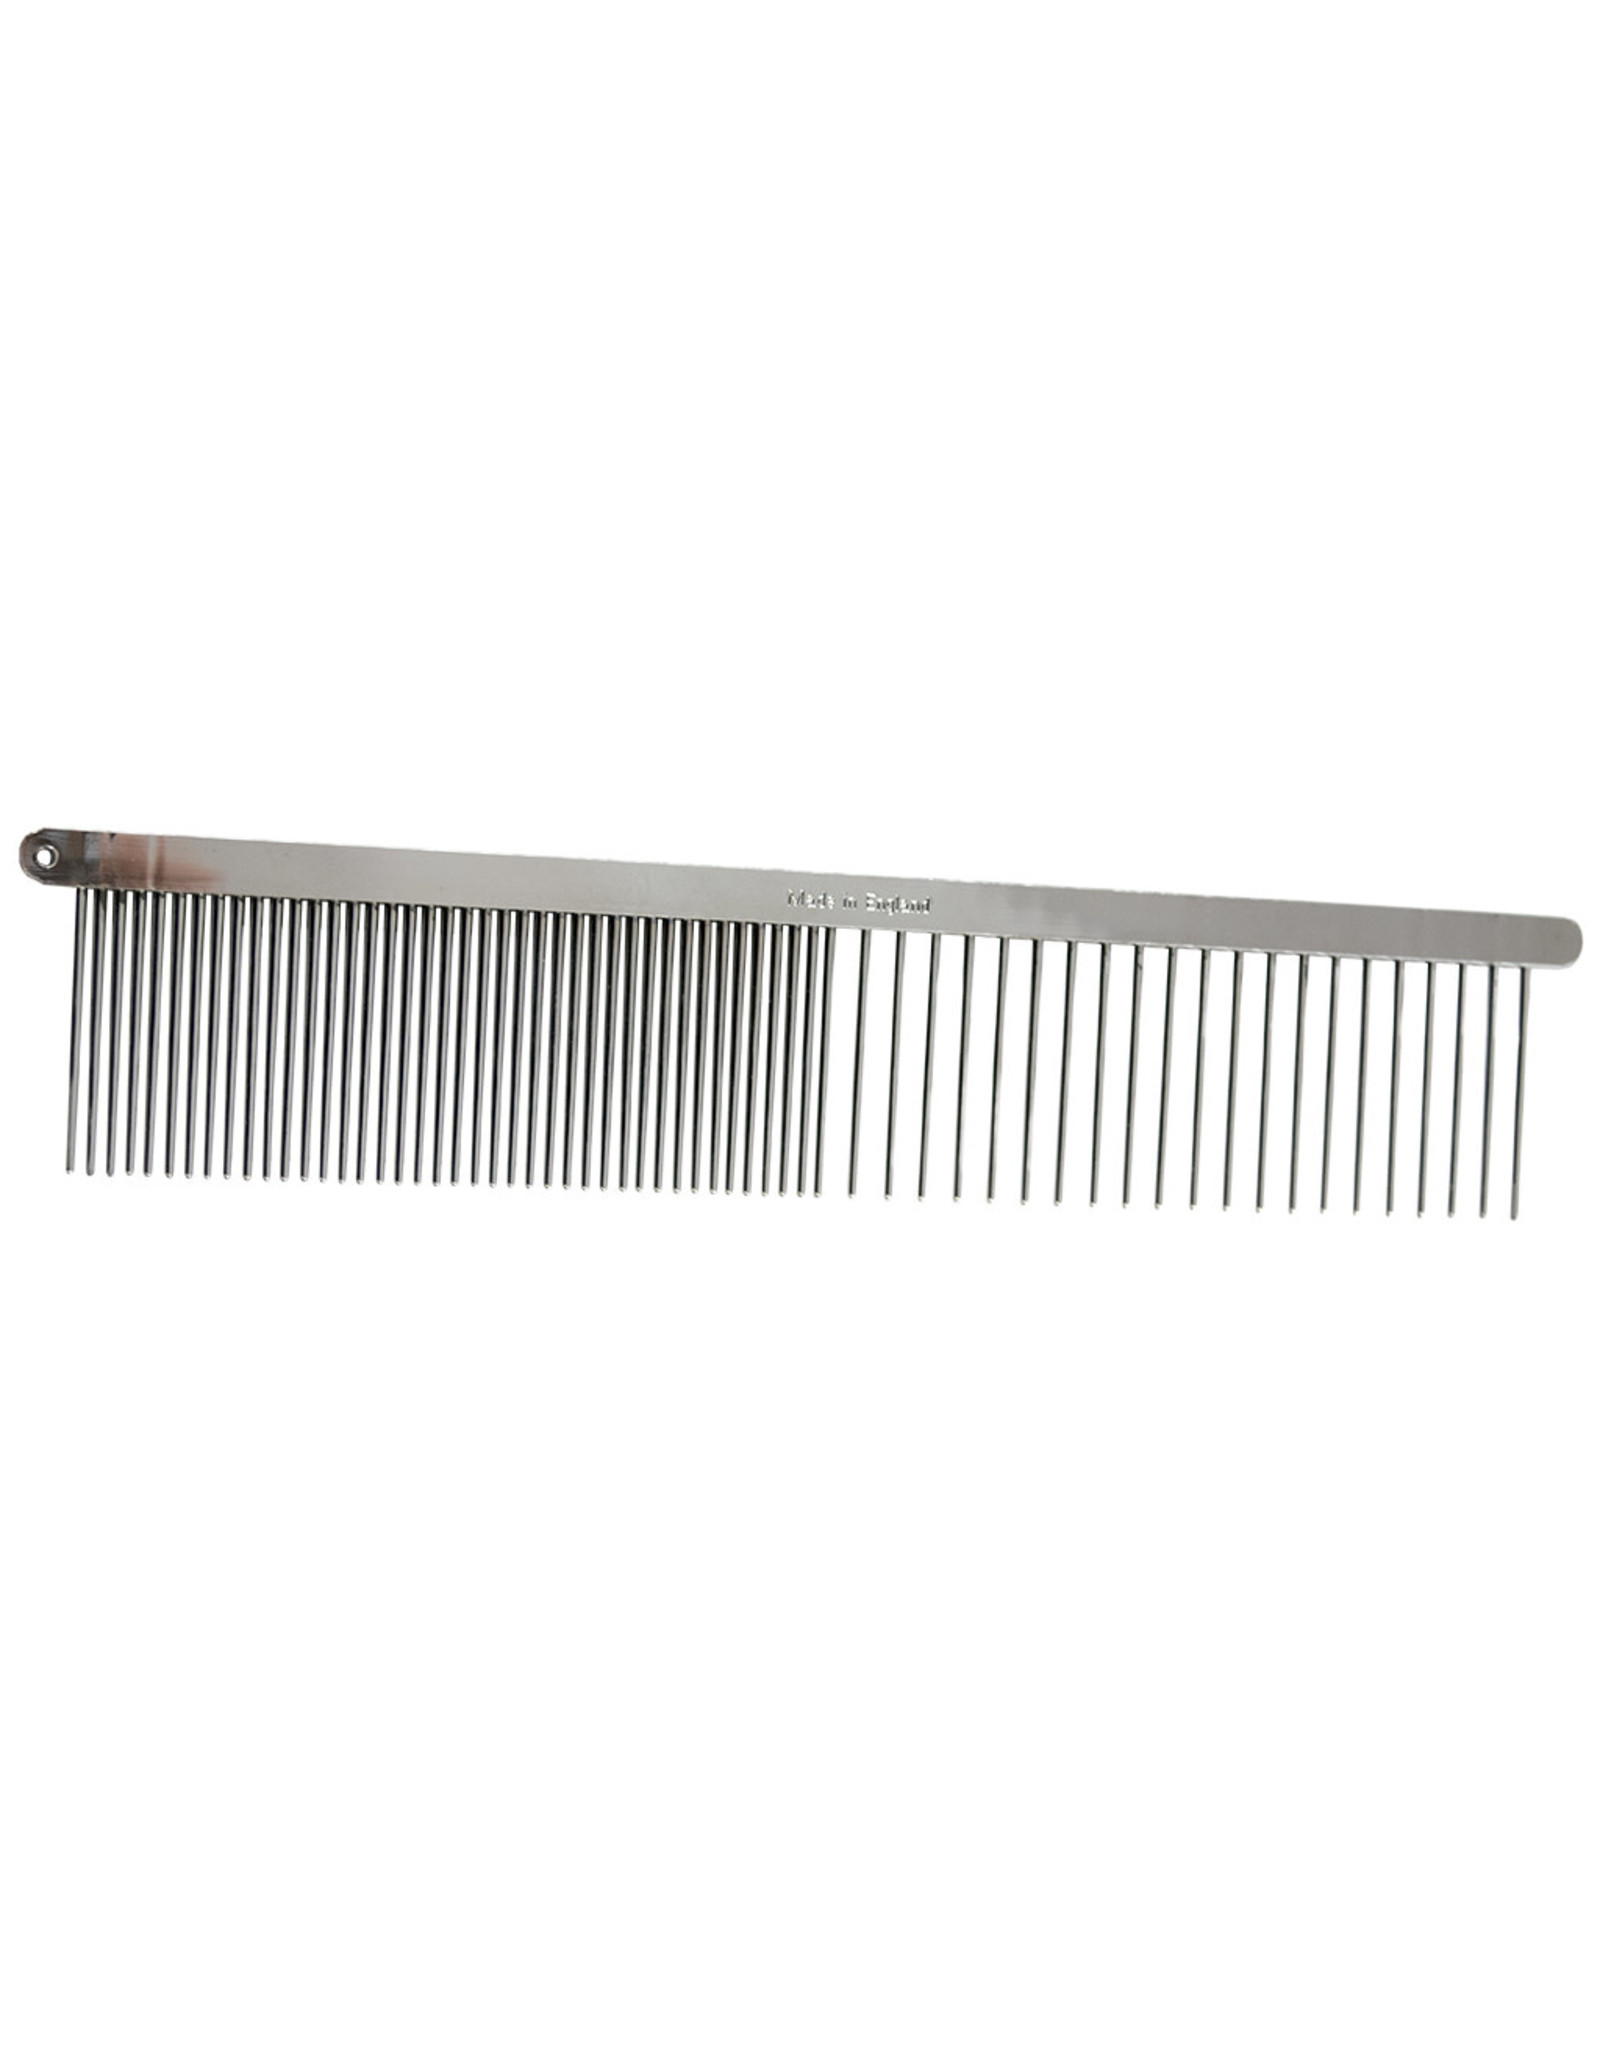 Millers Forge Greyhound Comb 17.5” w/ 1 1/8” Teeth